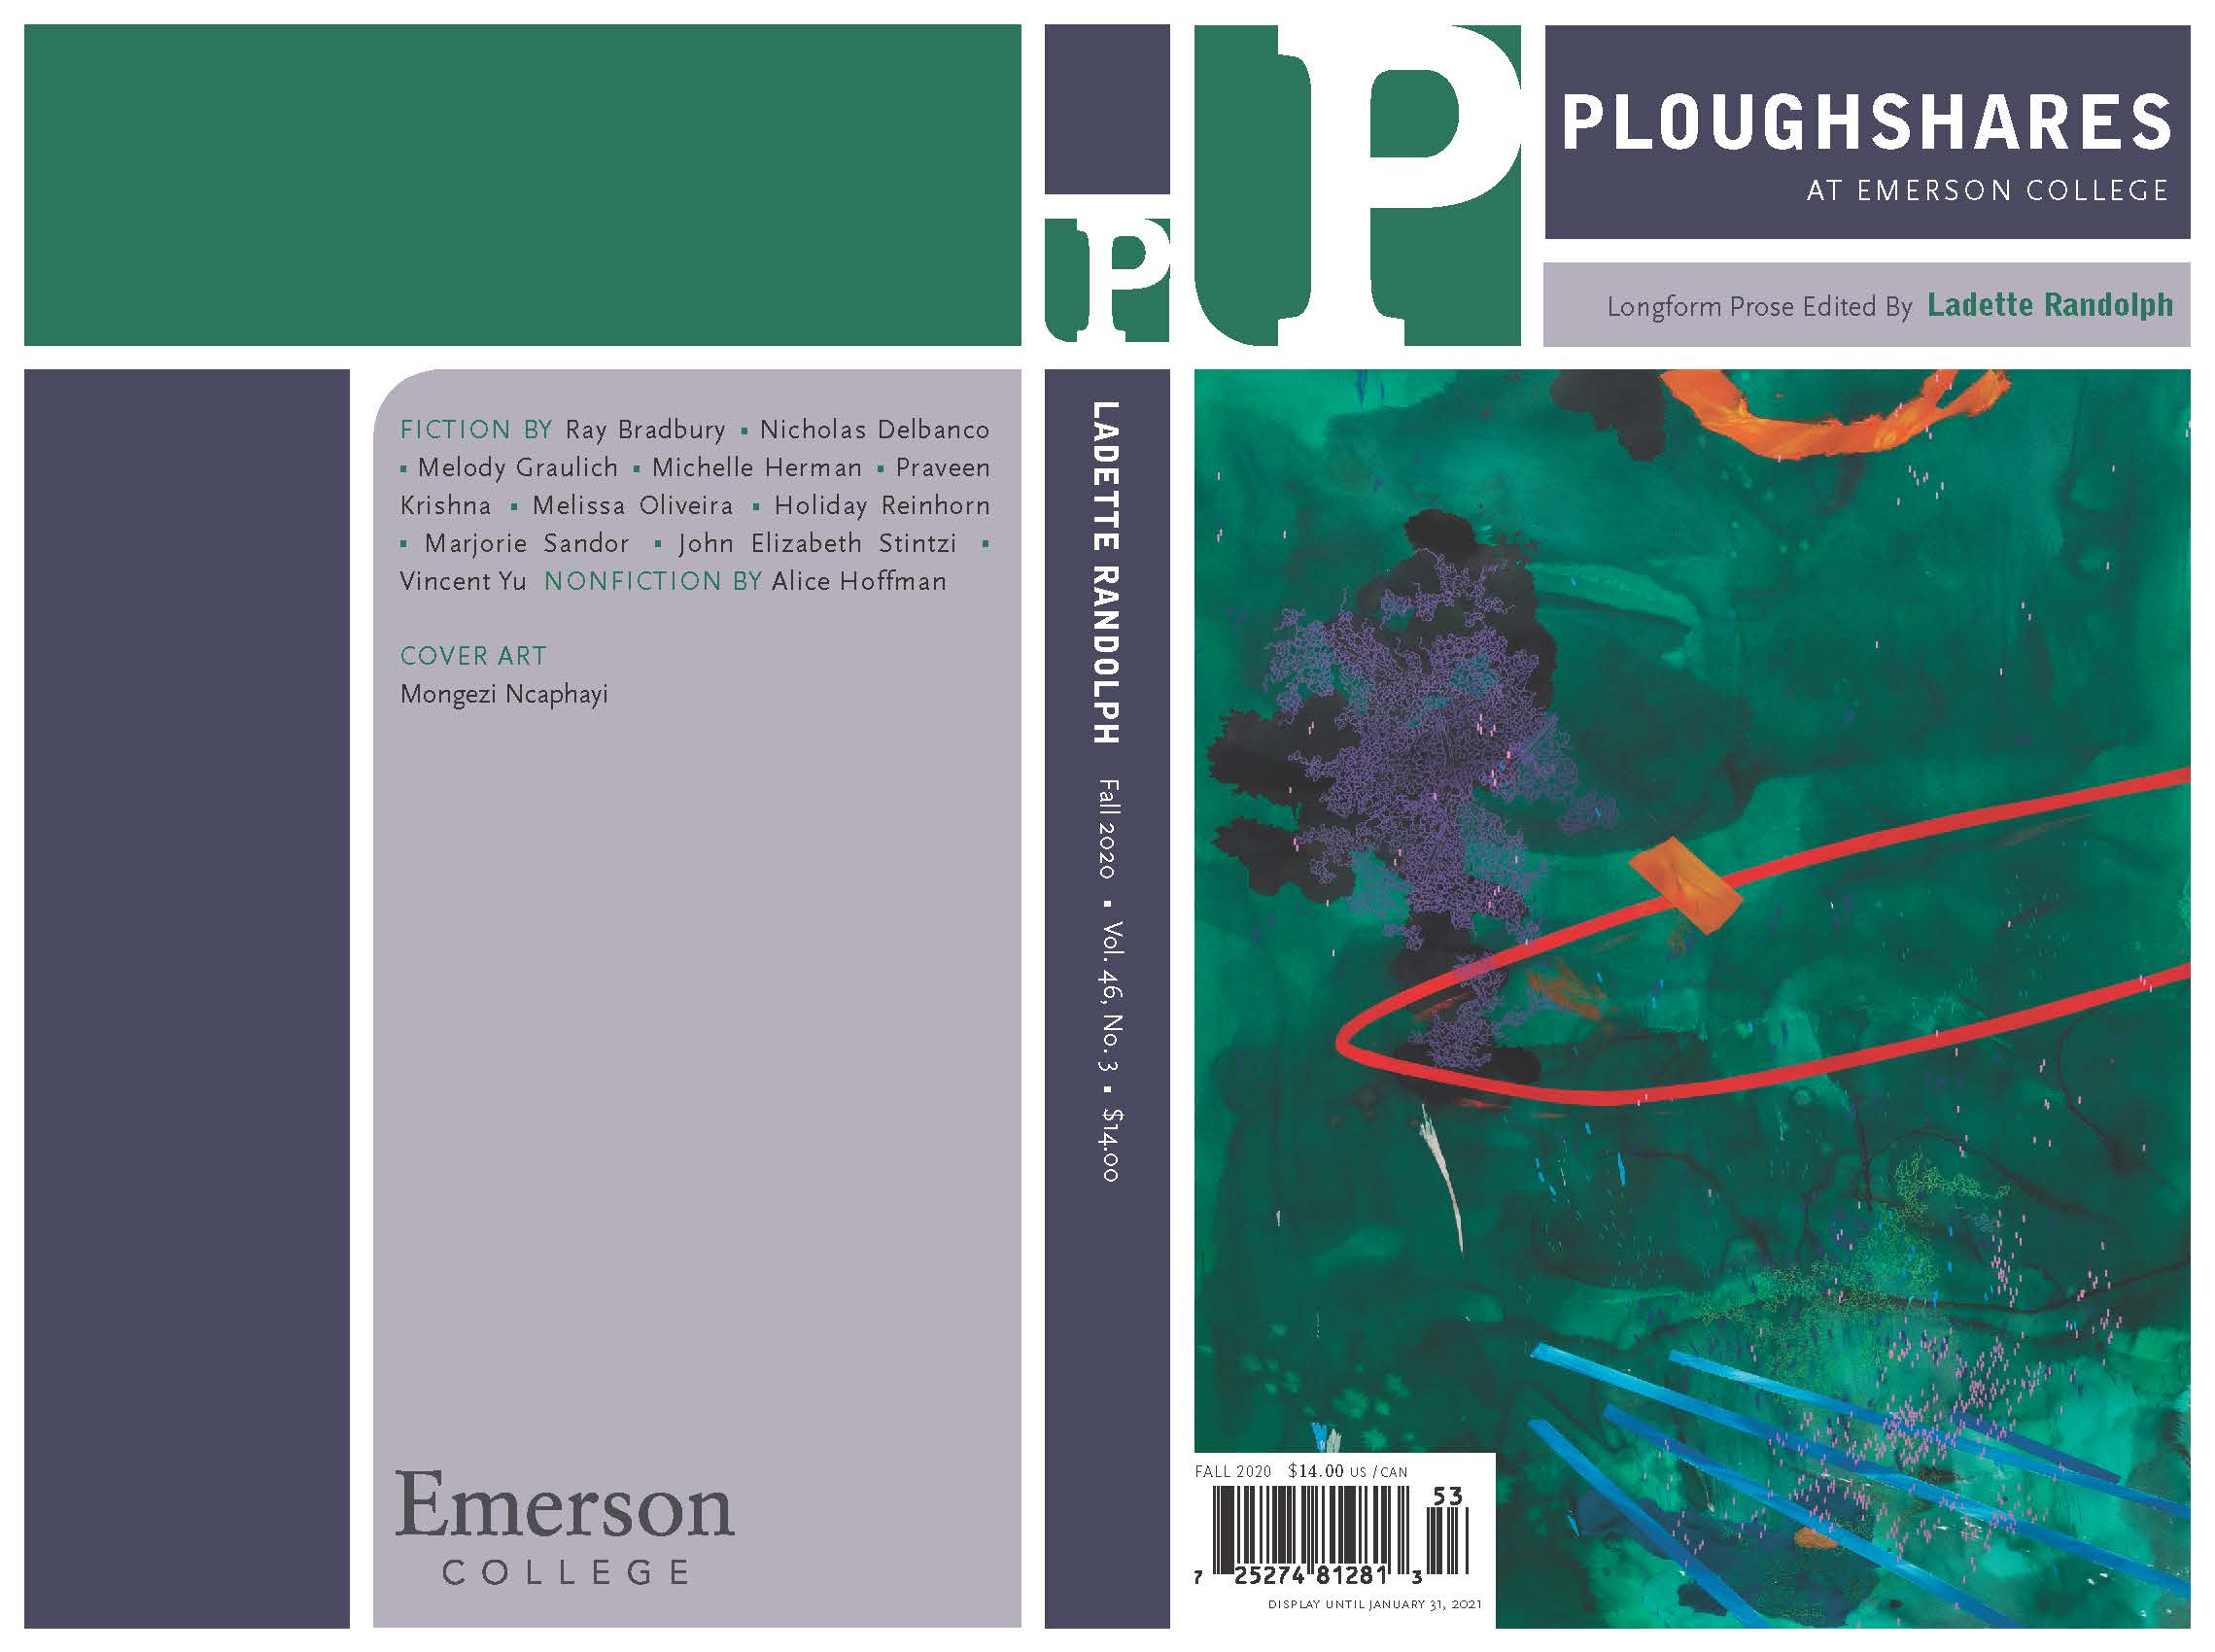 Ploughshares book cover